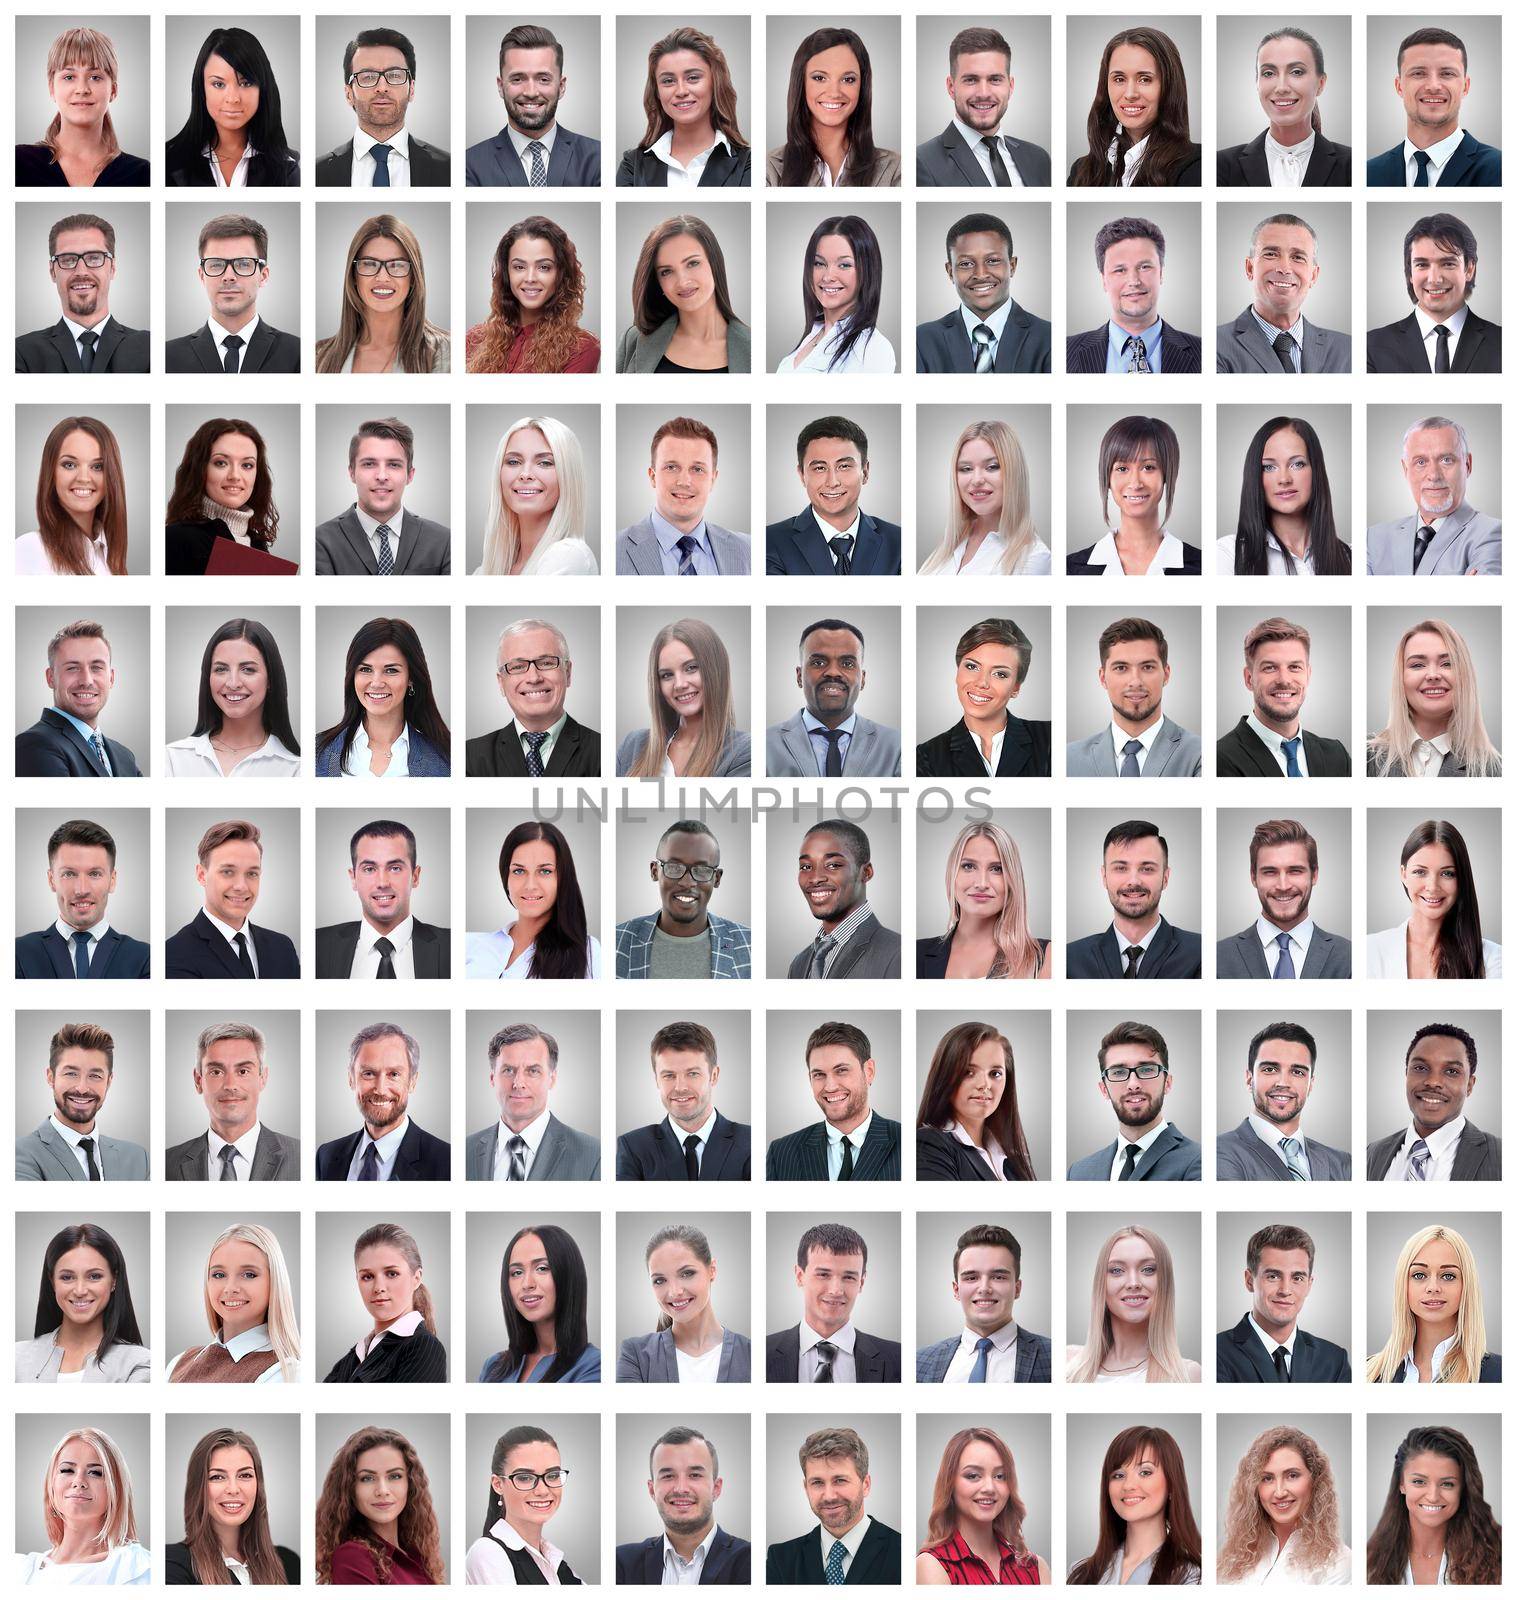 portraits of a group of successful employees isolated on white by asdf